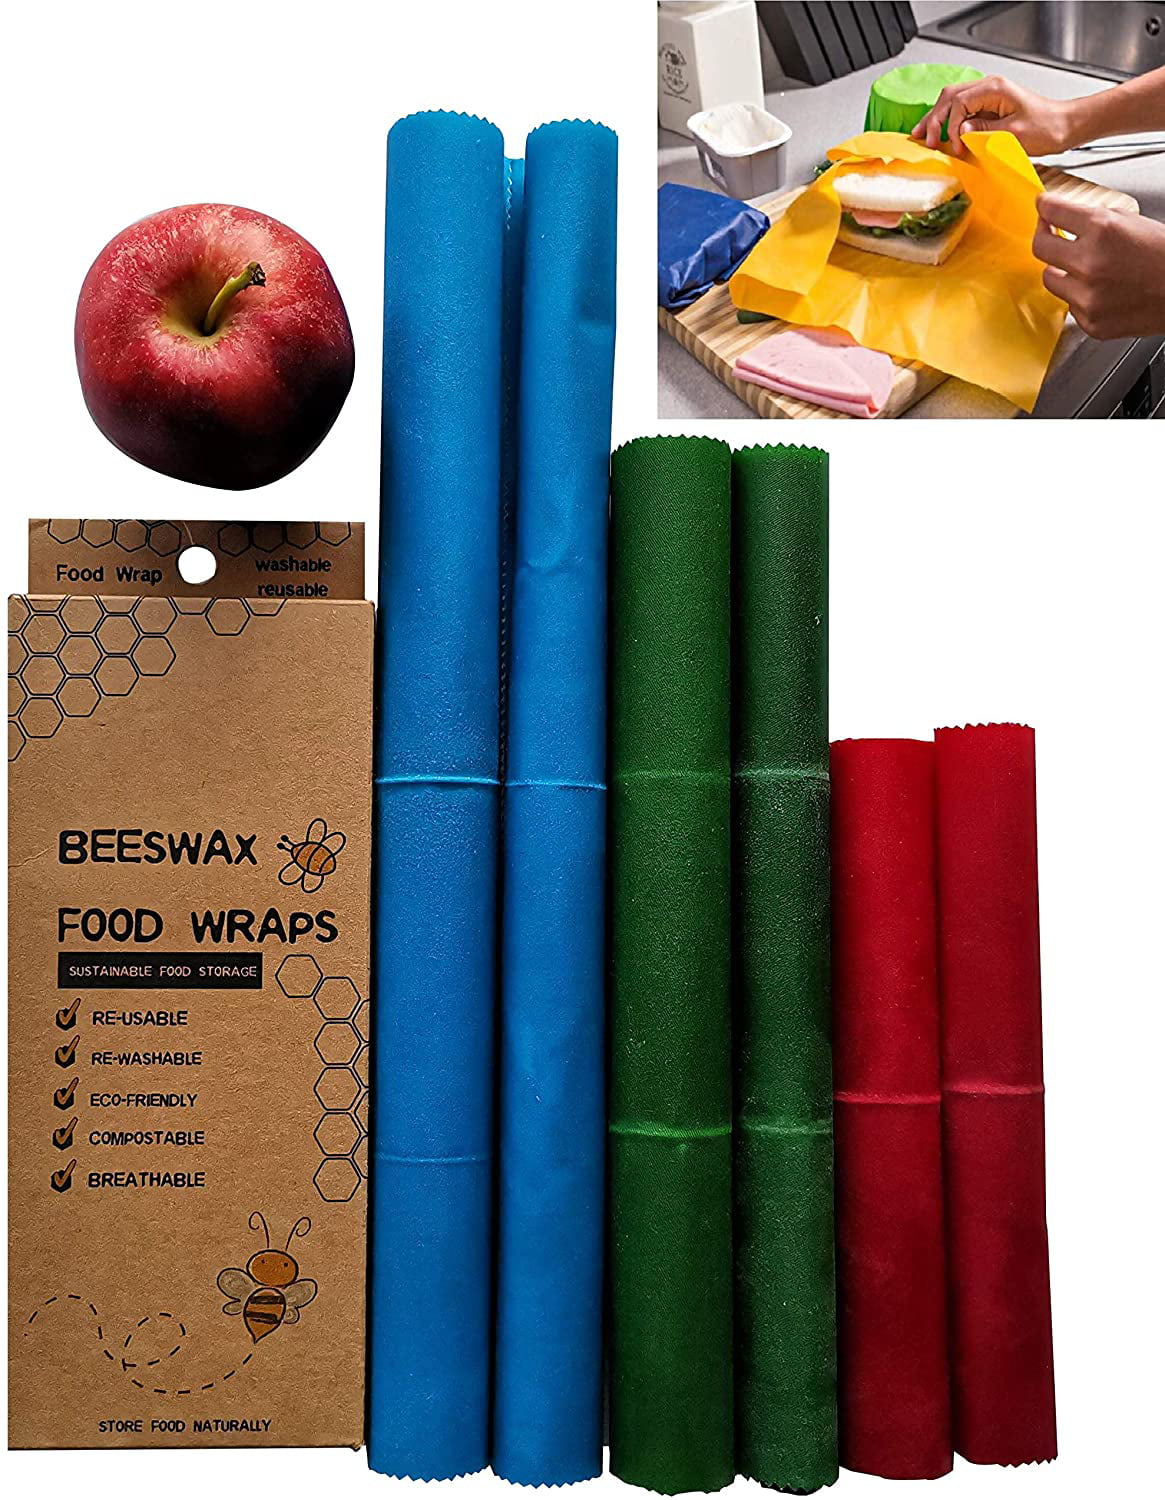 Beeswax food wrap cotton bags eco friendly reusable and rewashable Feroto 